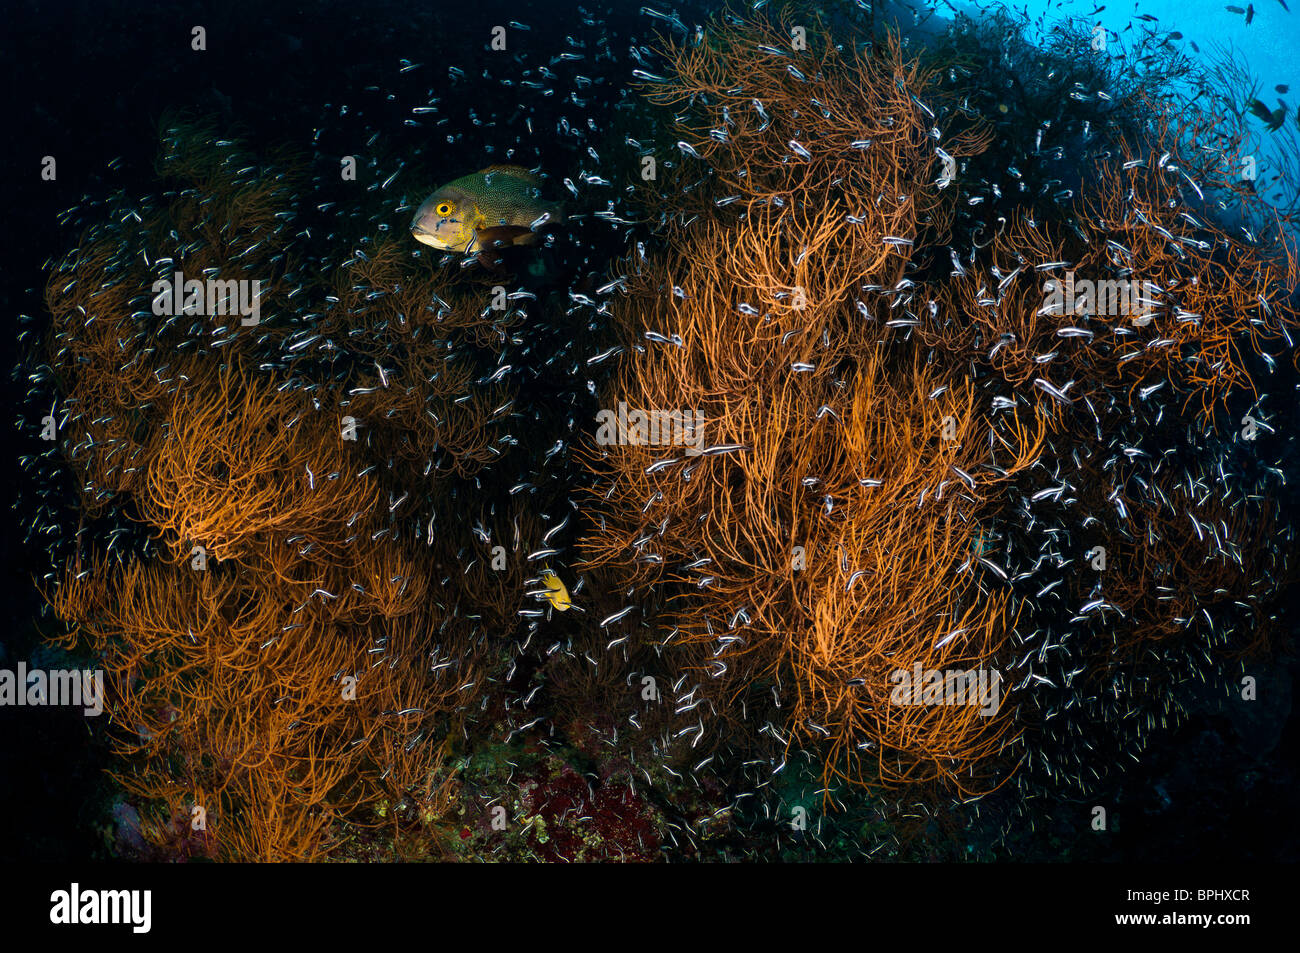 Midnight snapper and juvenile convict blennies in a black coral bush, Bunaken Marine Park, Manado, Sulawesi, Indonesia. Stock Photo